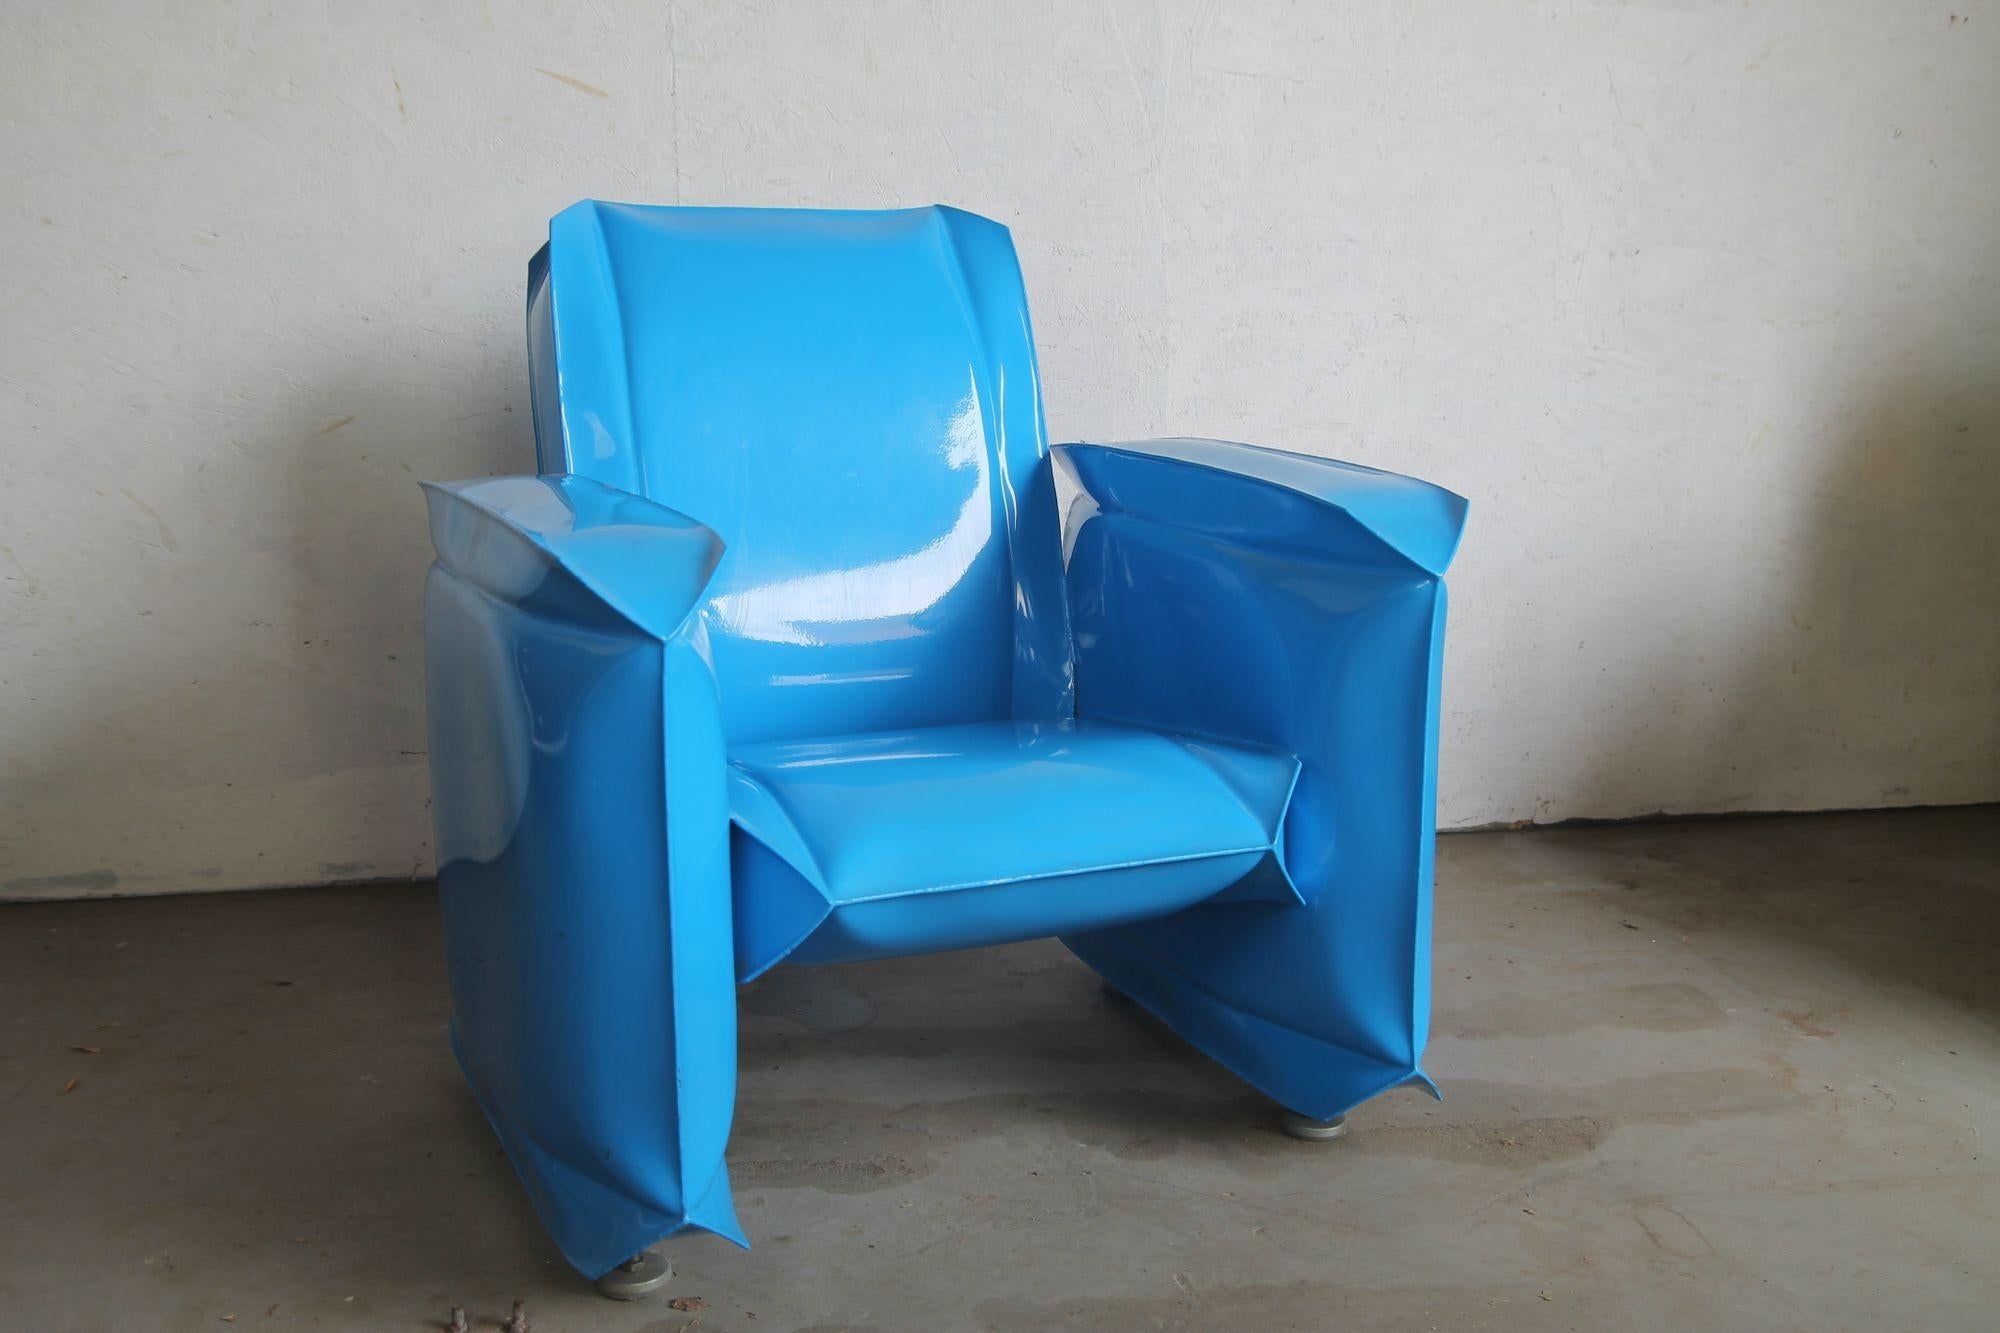 Im pleased to offer this great set of inflated metal furniture by Robert Anderson. This set was purchased from Robert in 2000. This wild set consisting of a 2 seater and two lounge chairs works outdoors as well as indoors. Robert is aclaimed for his